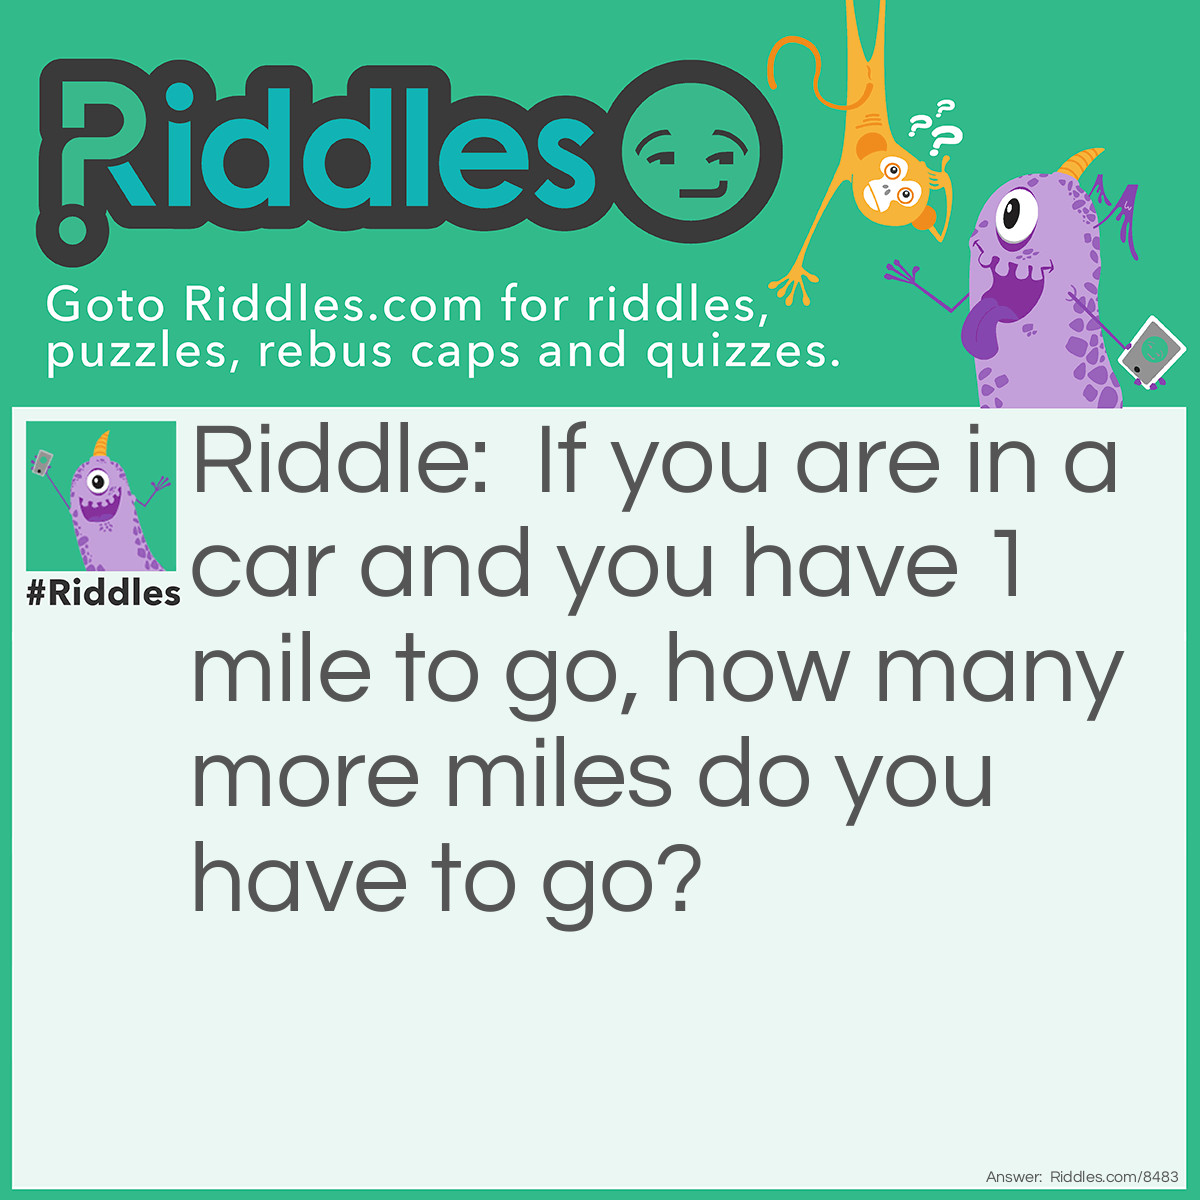 Riddle: If you are in a car and you have 1 mile to go, how many more miles do you have to go? Answer: 1 mile.